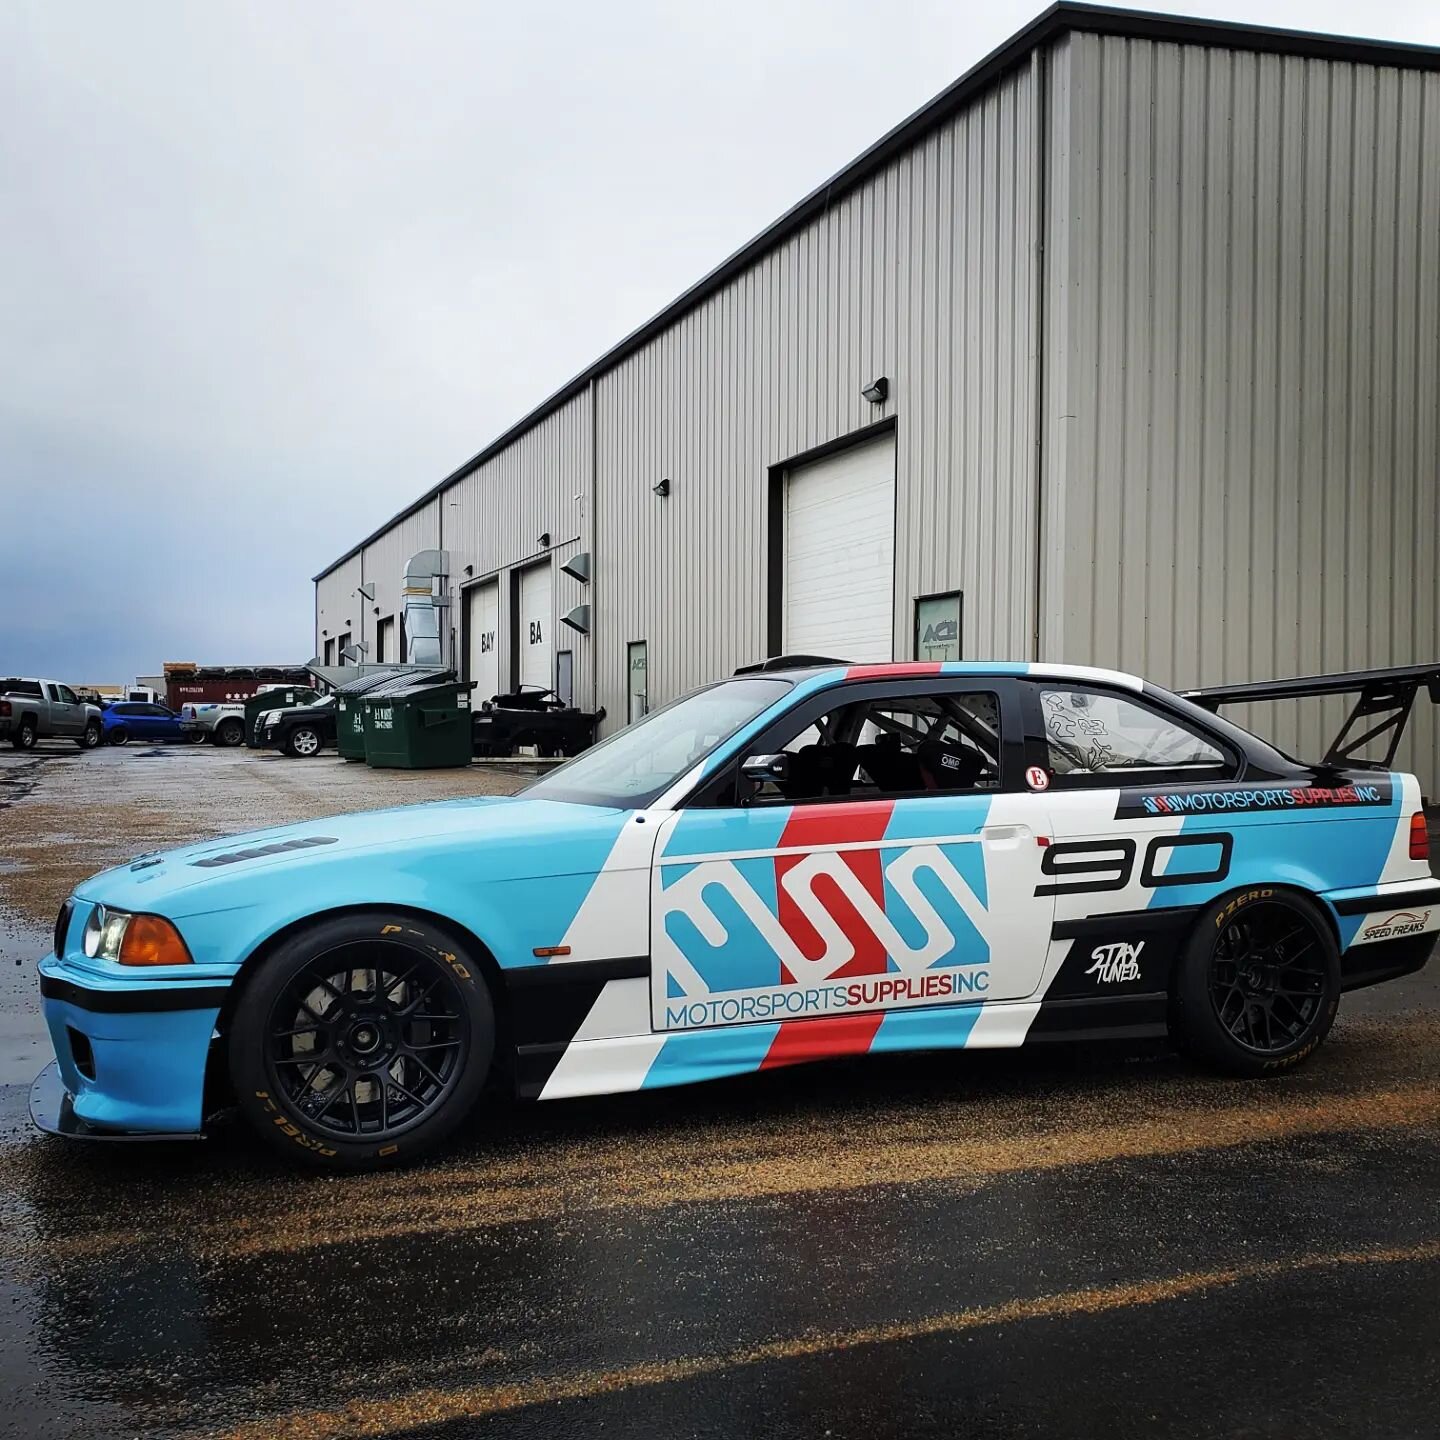 Awesome wrap for @motorsports_supplies_inc 
Design by @projectx60 

#vinylwrap #campvinyl #racing #yeg #leduc